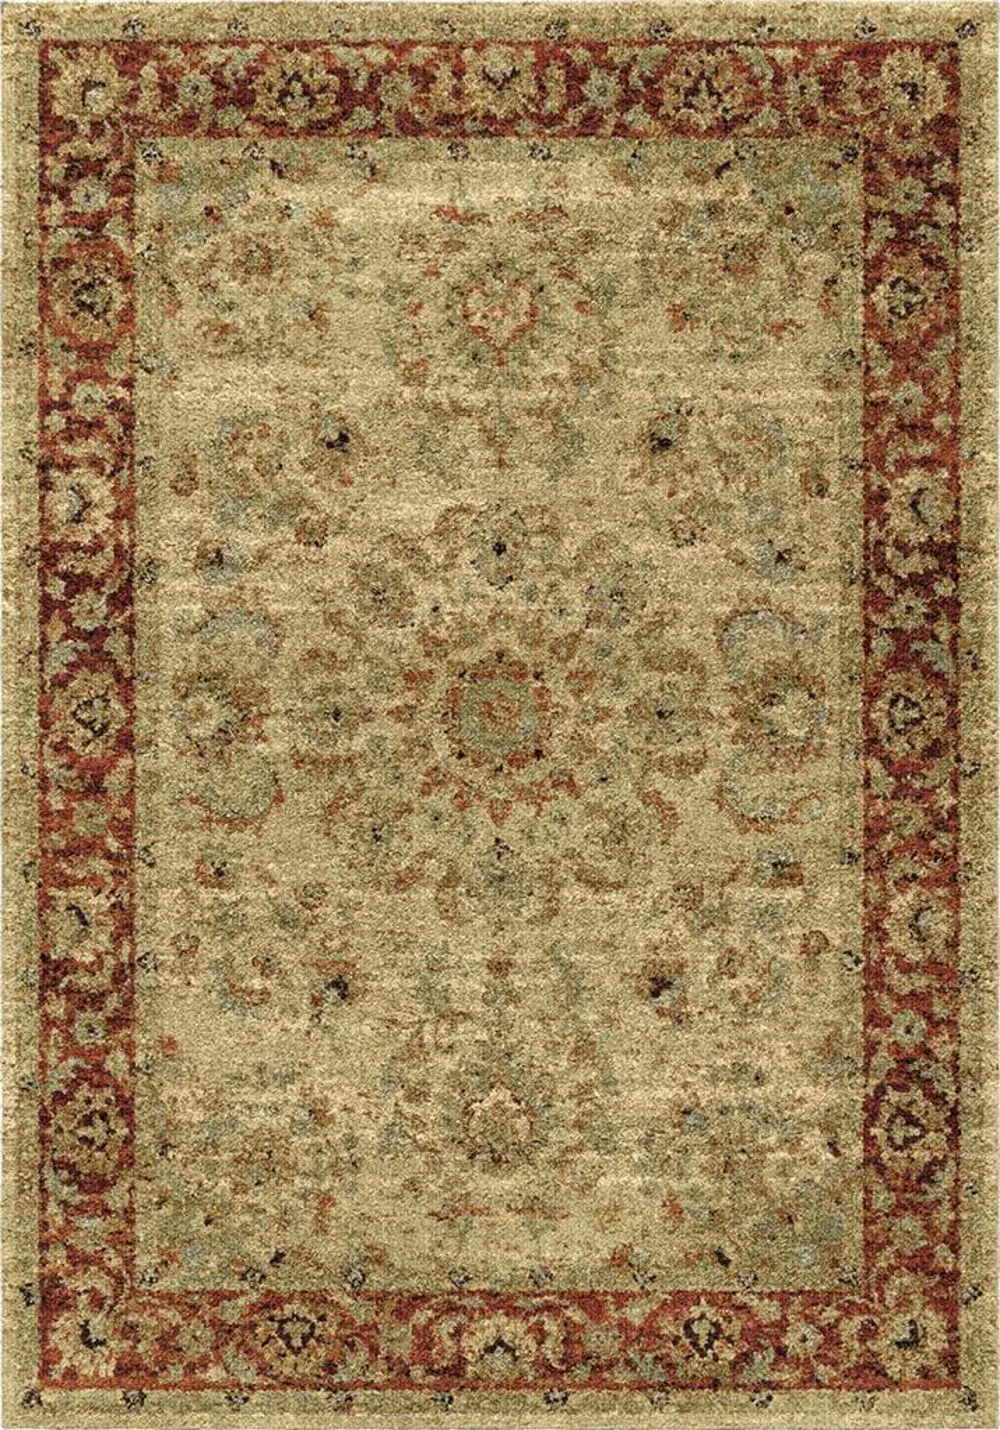 4319/5X8/AMERICANHER 5 x 8 Medium Ivory and Red Area Rug - American Heritage-1